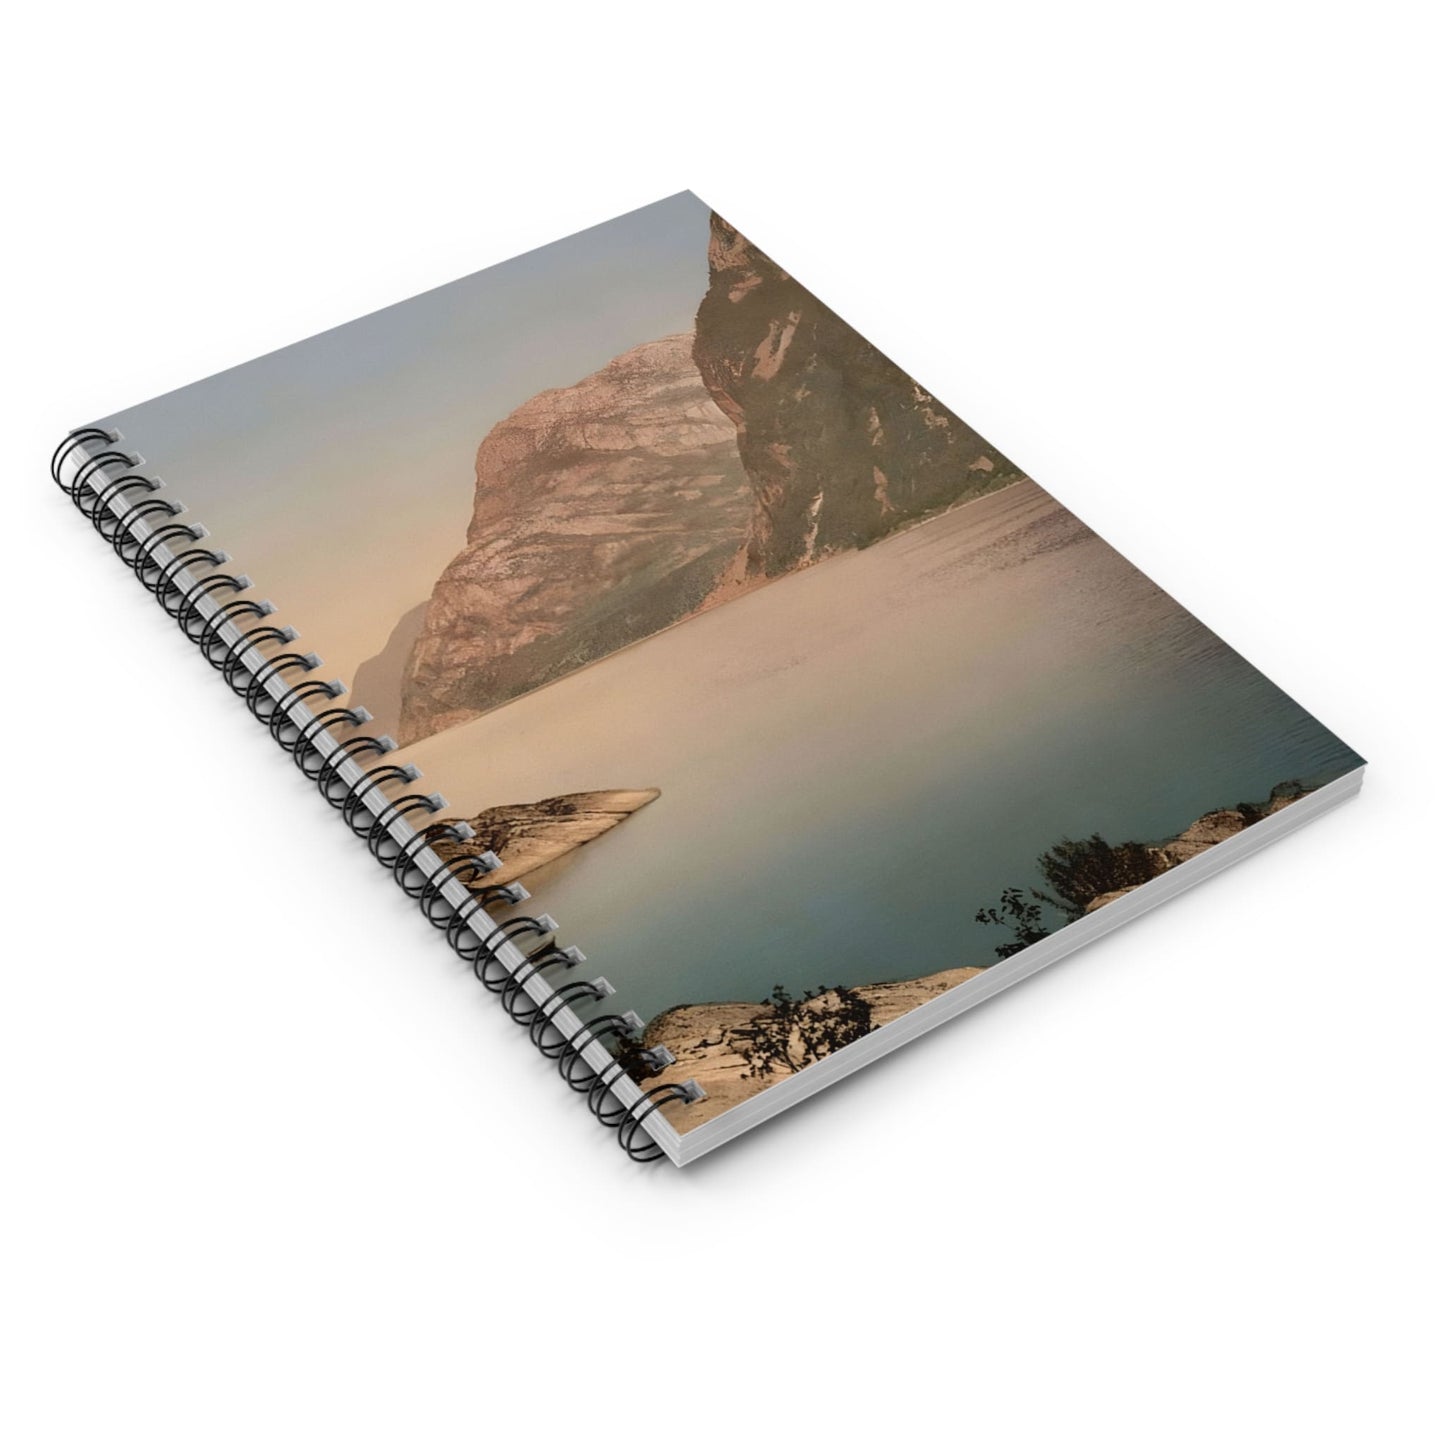 Summer Mountains Spiral Notebook Laying Flat on White Surface